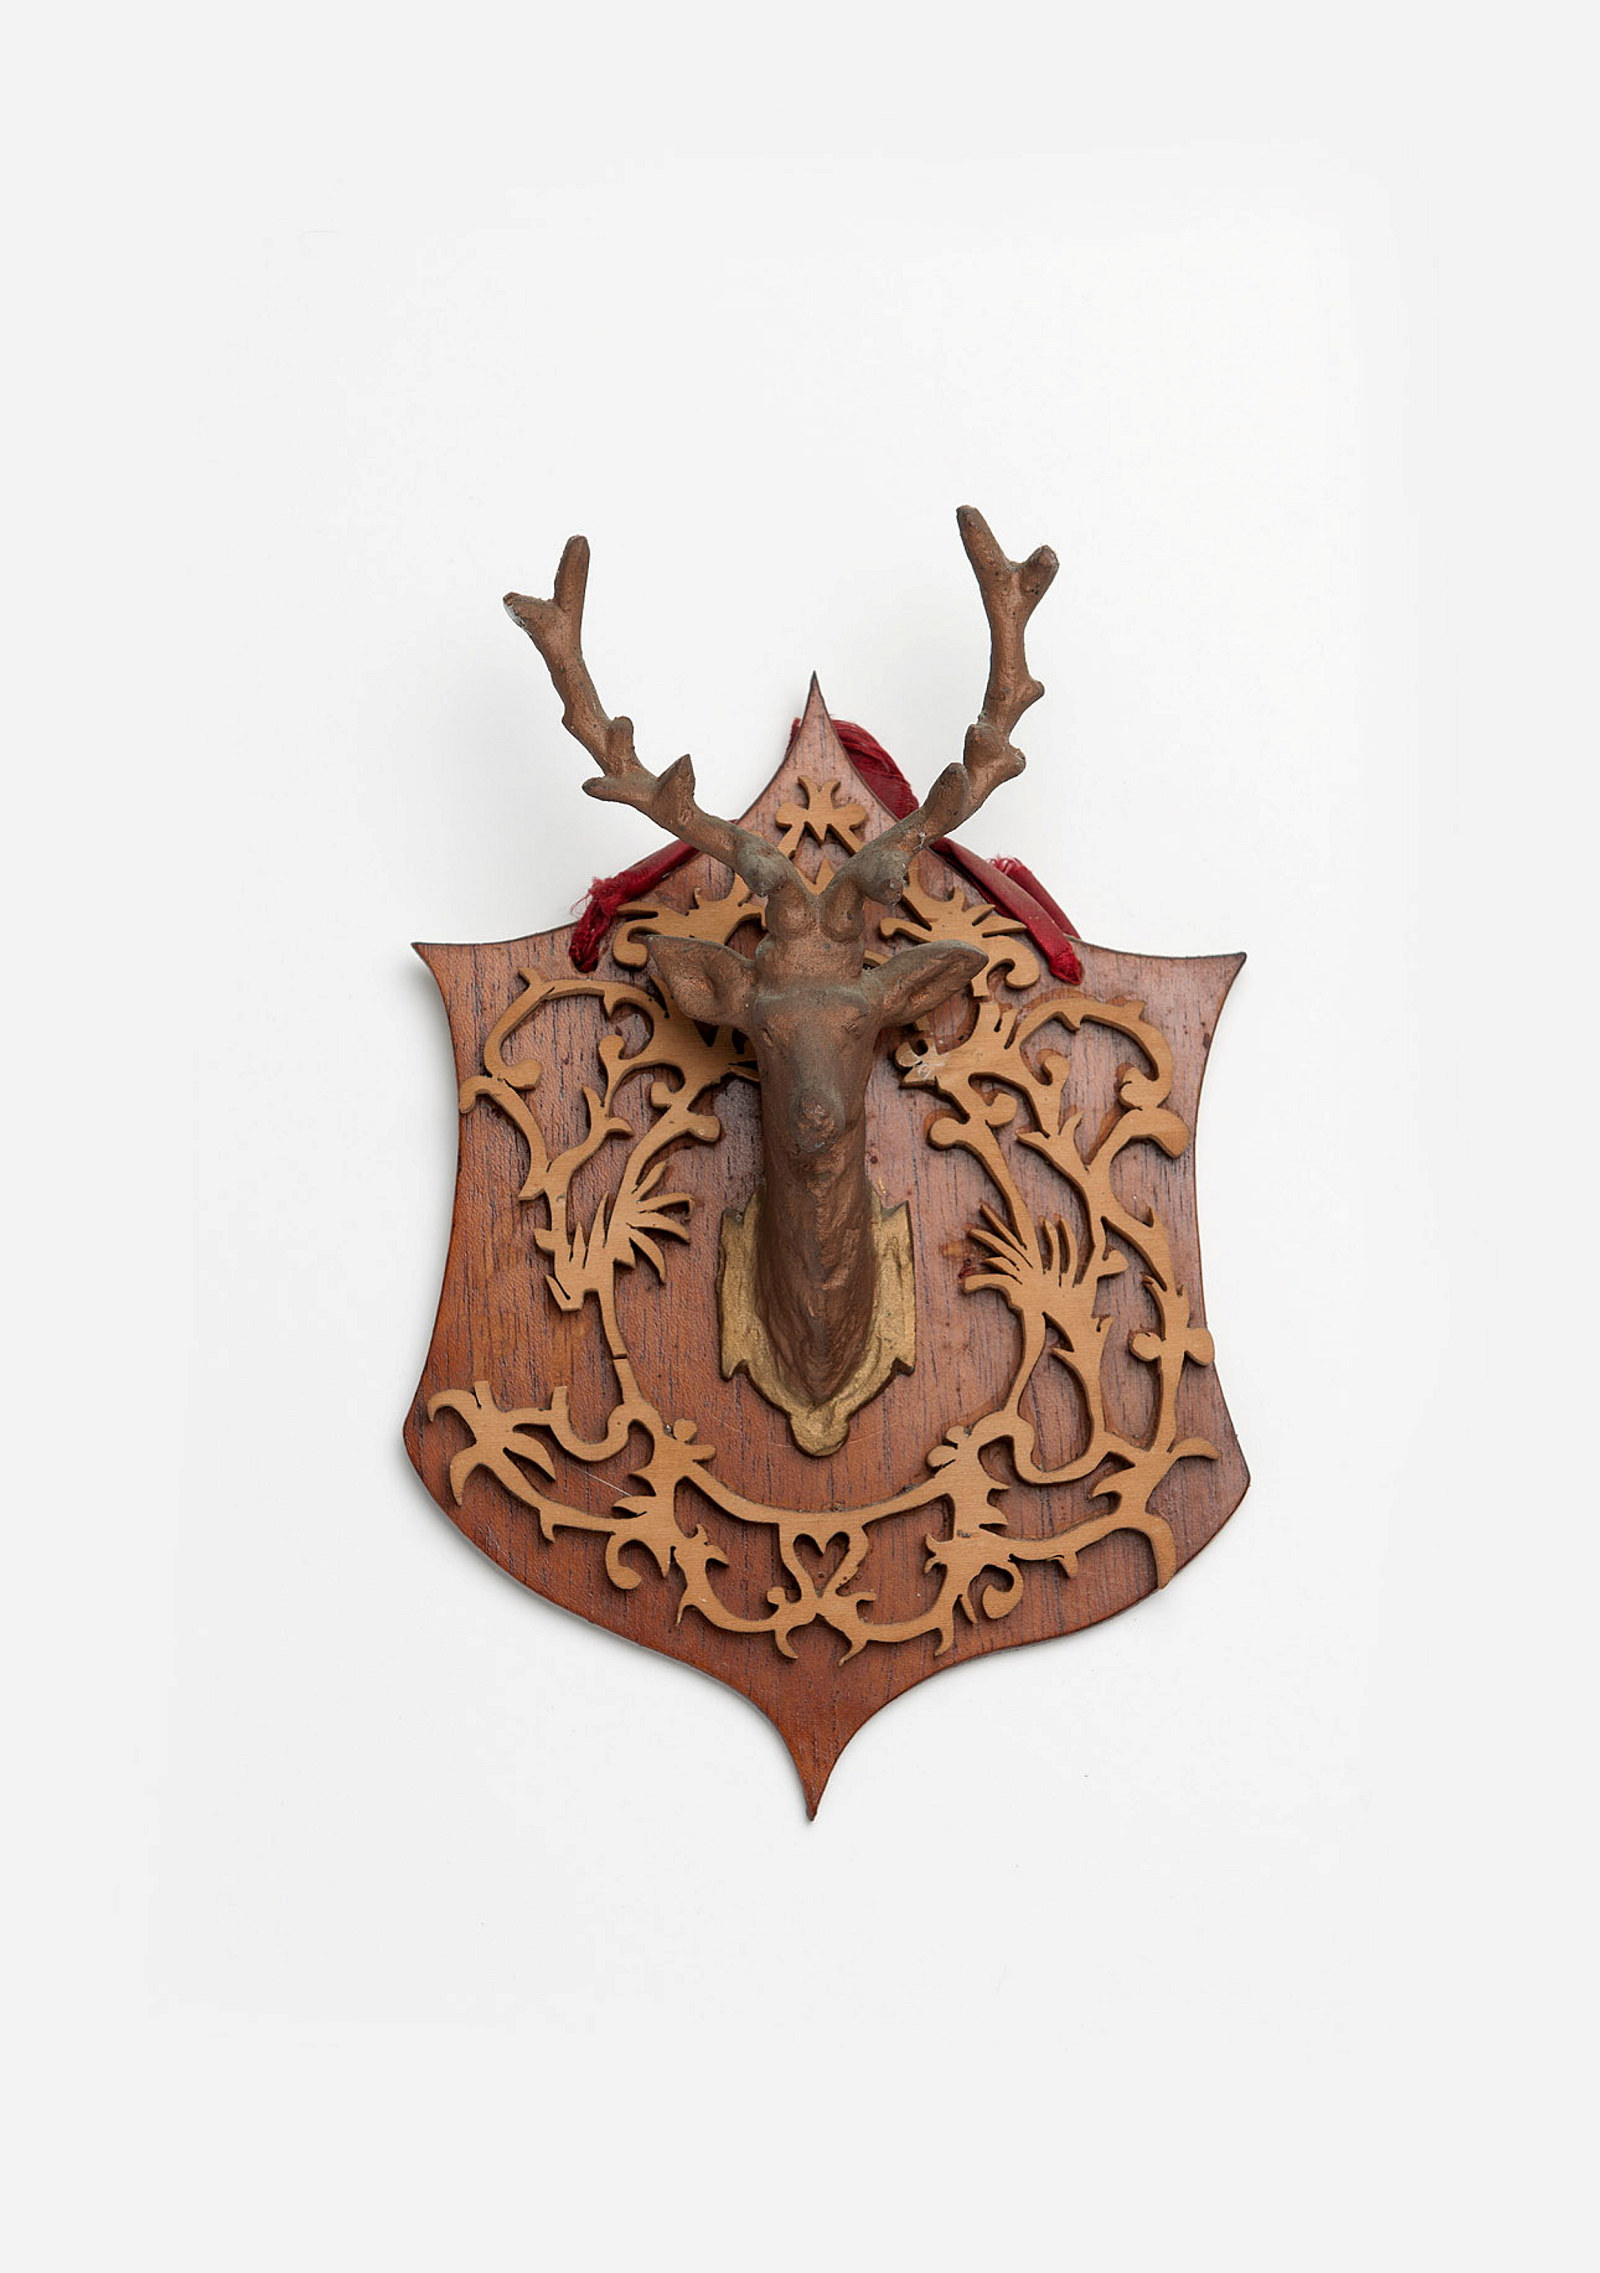 Stag's head mounted on crest-shaped backing.